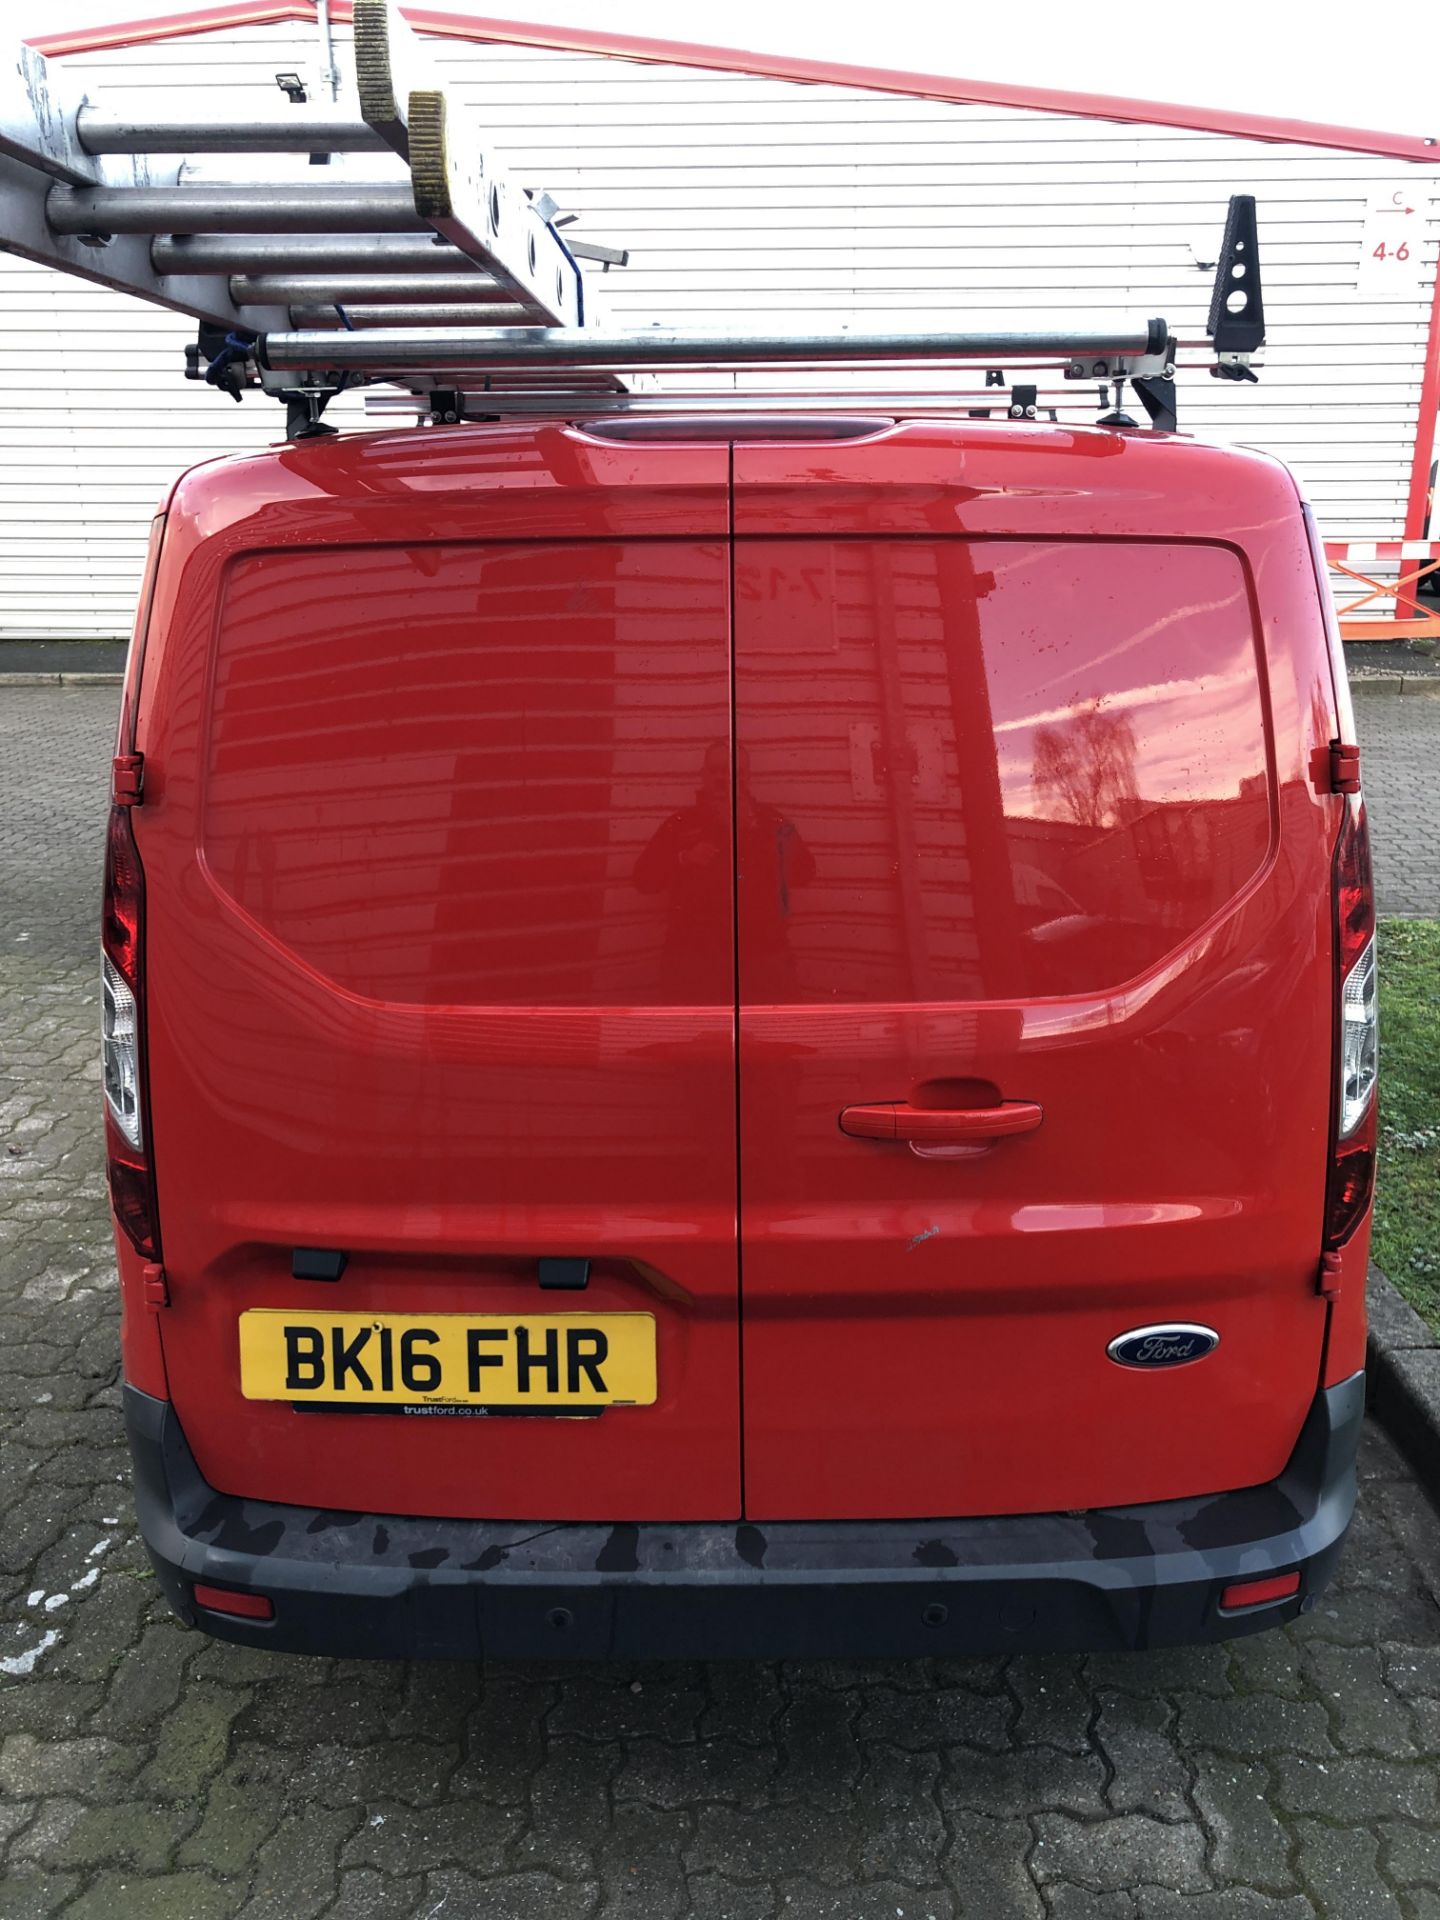 Ford Transit Connect 240 Limited, Red - Image 8 of 18